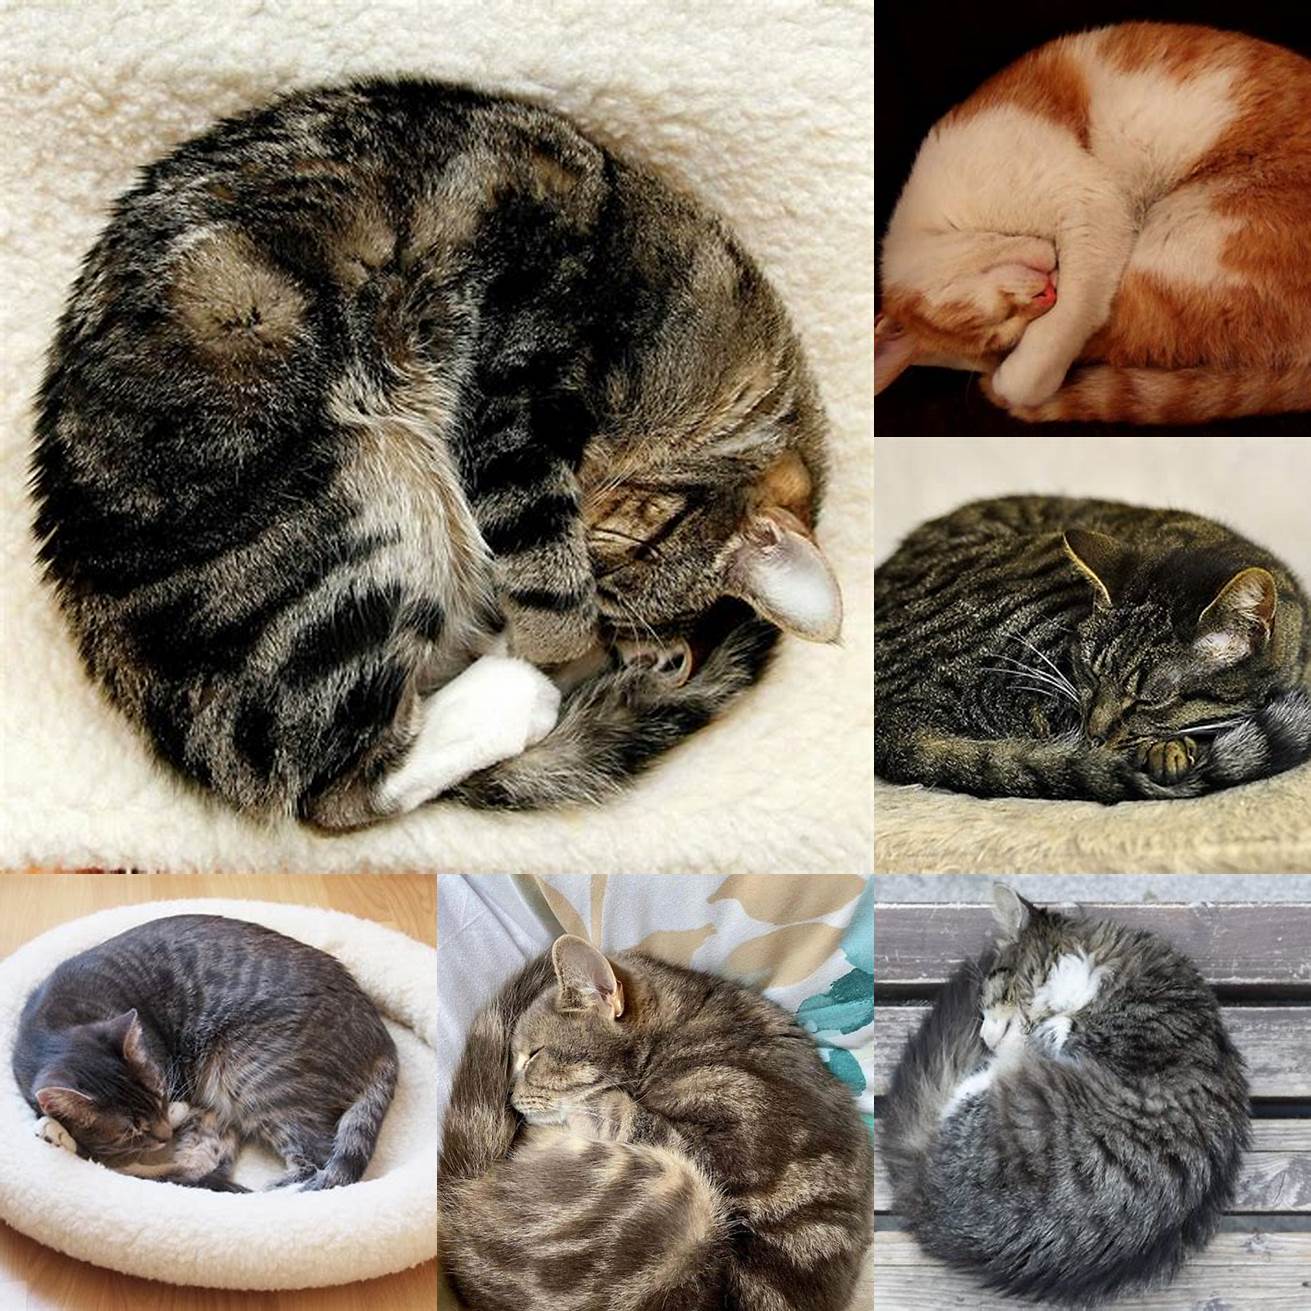 Cat curled up in a ballWhen a cat is in a deep sleep they will often curl up into a ball tucking their head under their body and wrapping their tail around themselves This is a natural instinct that helps them conserve body heat and protect their vital organs